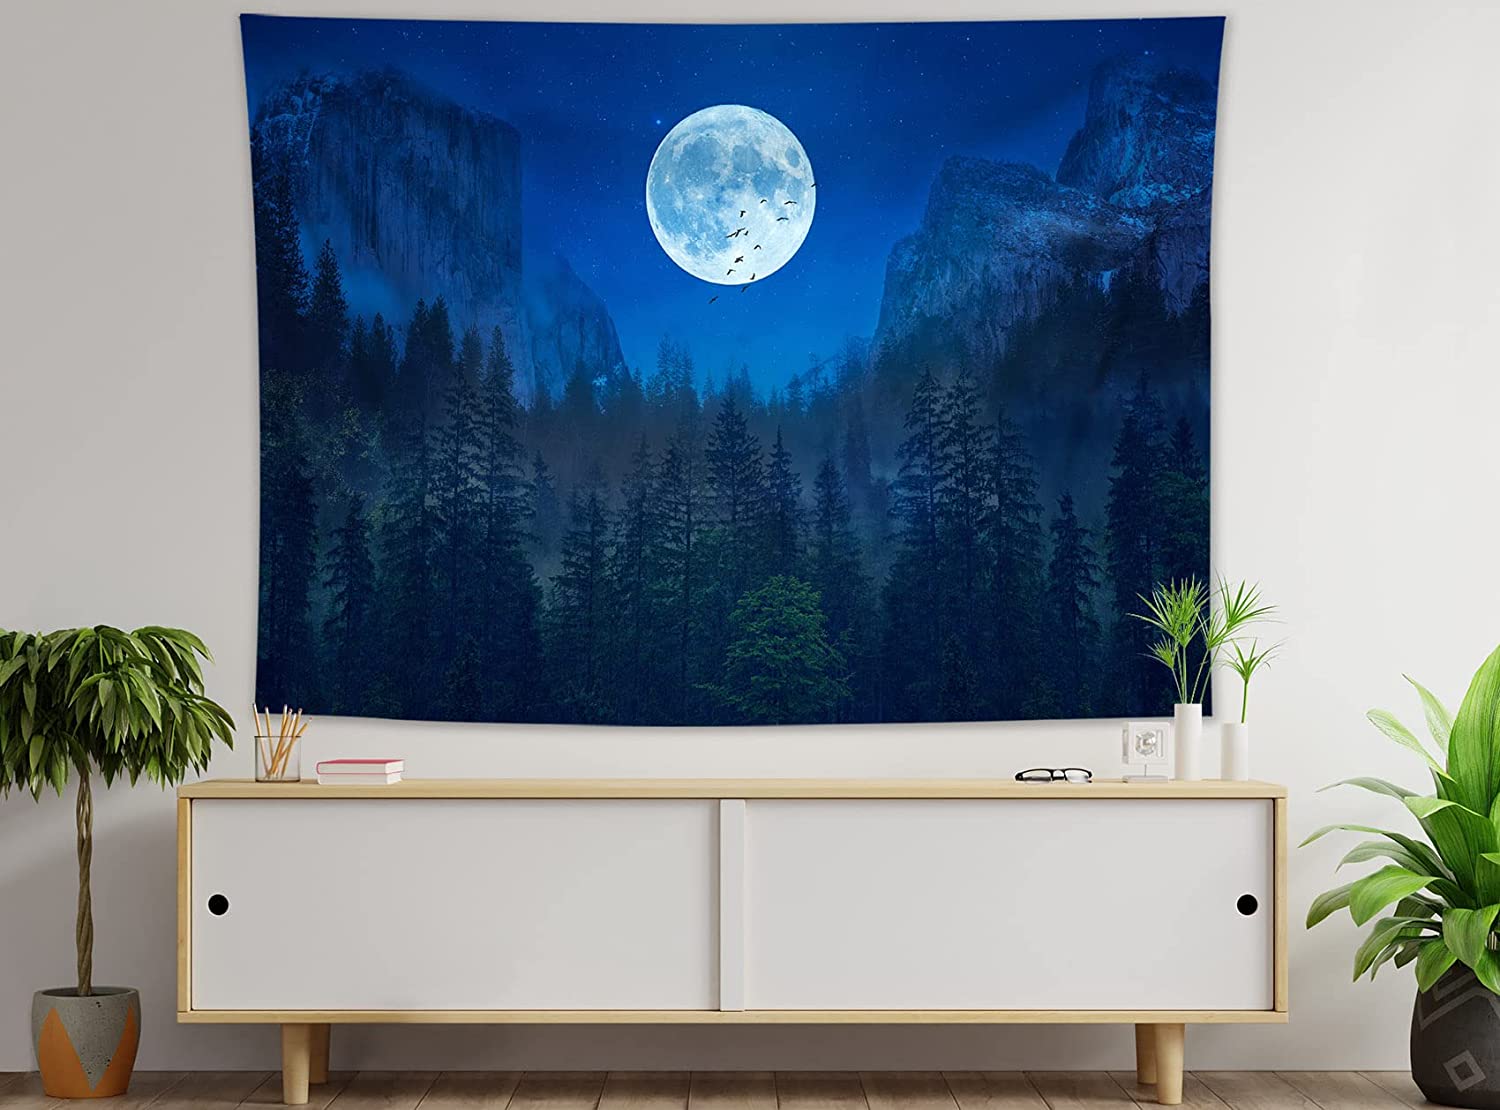 Full Moon Over Mountain On Starry Night Wallpapers